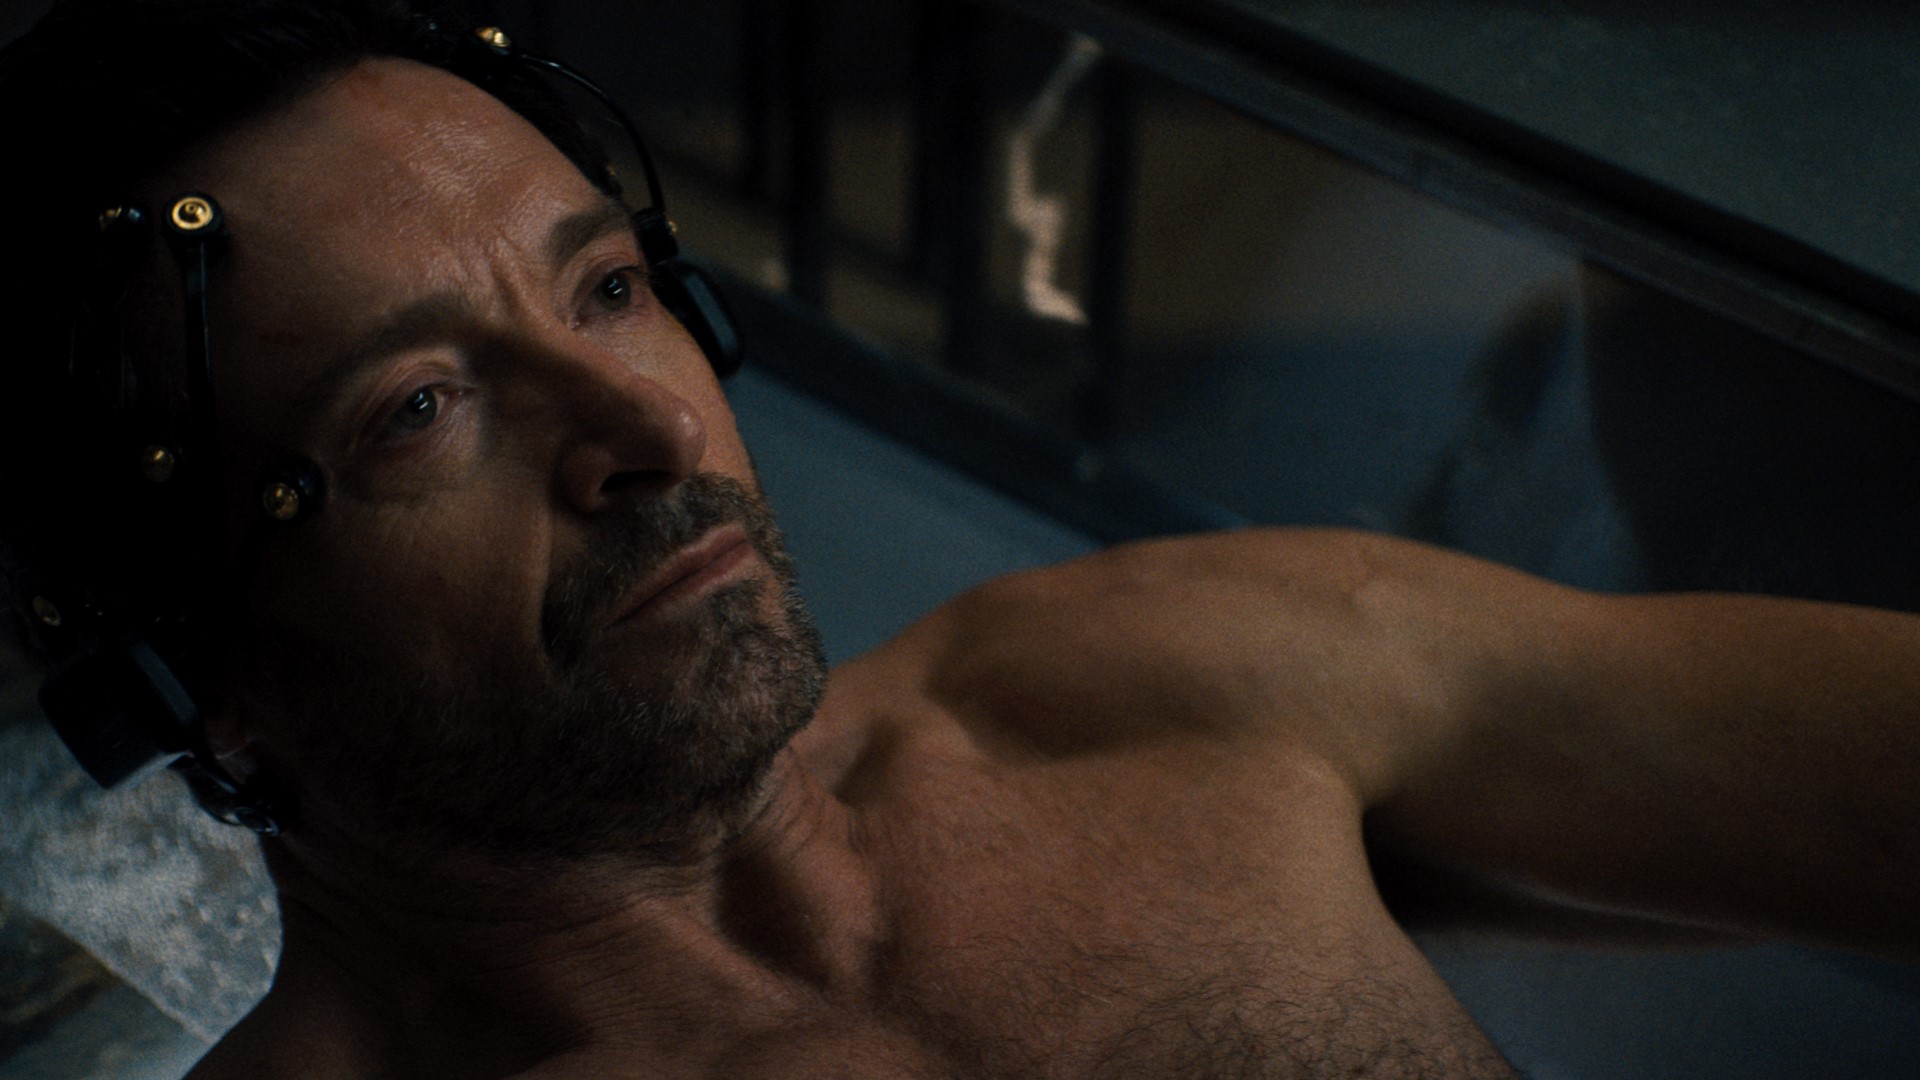 How the 52-year-old star of 'Reminiscence' finds the confidence to go shirtless. #k5evening